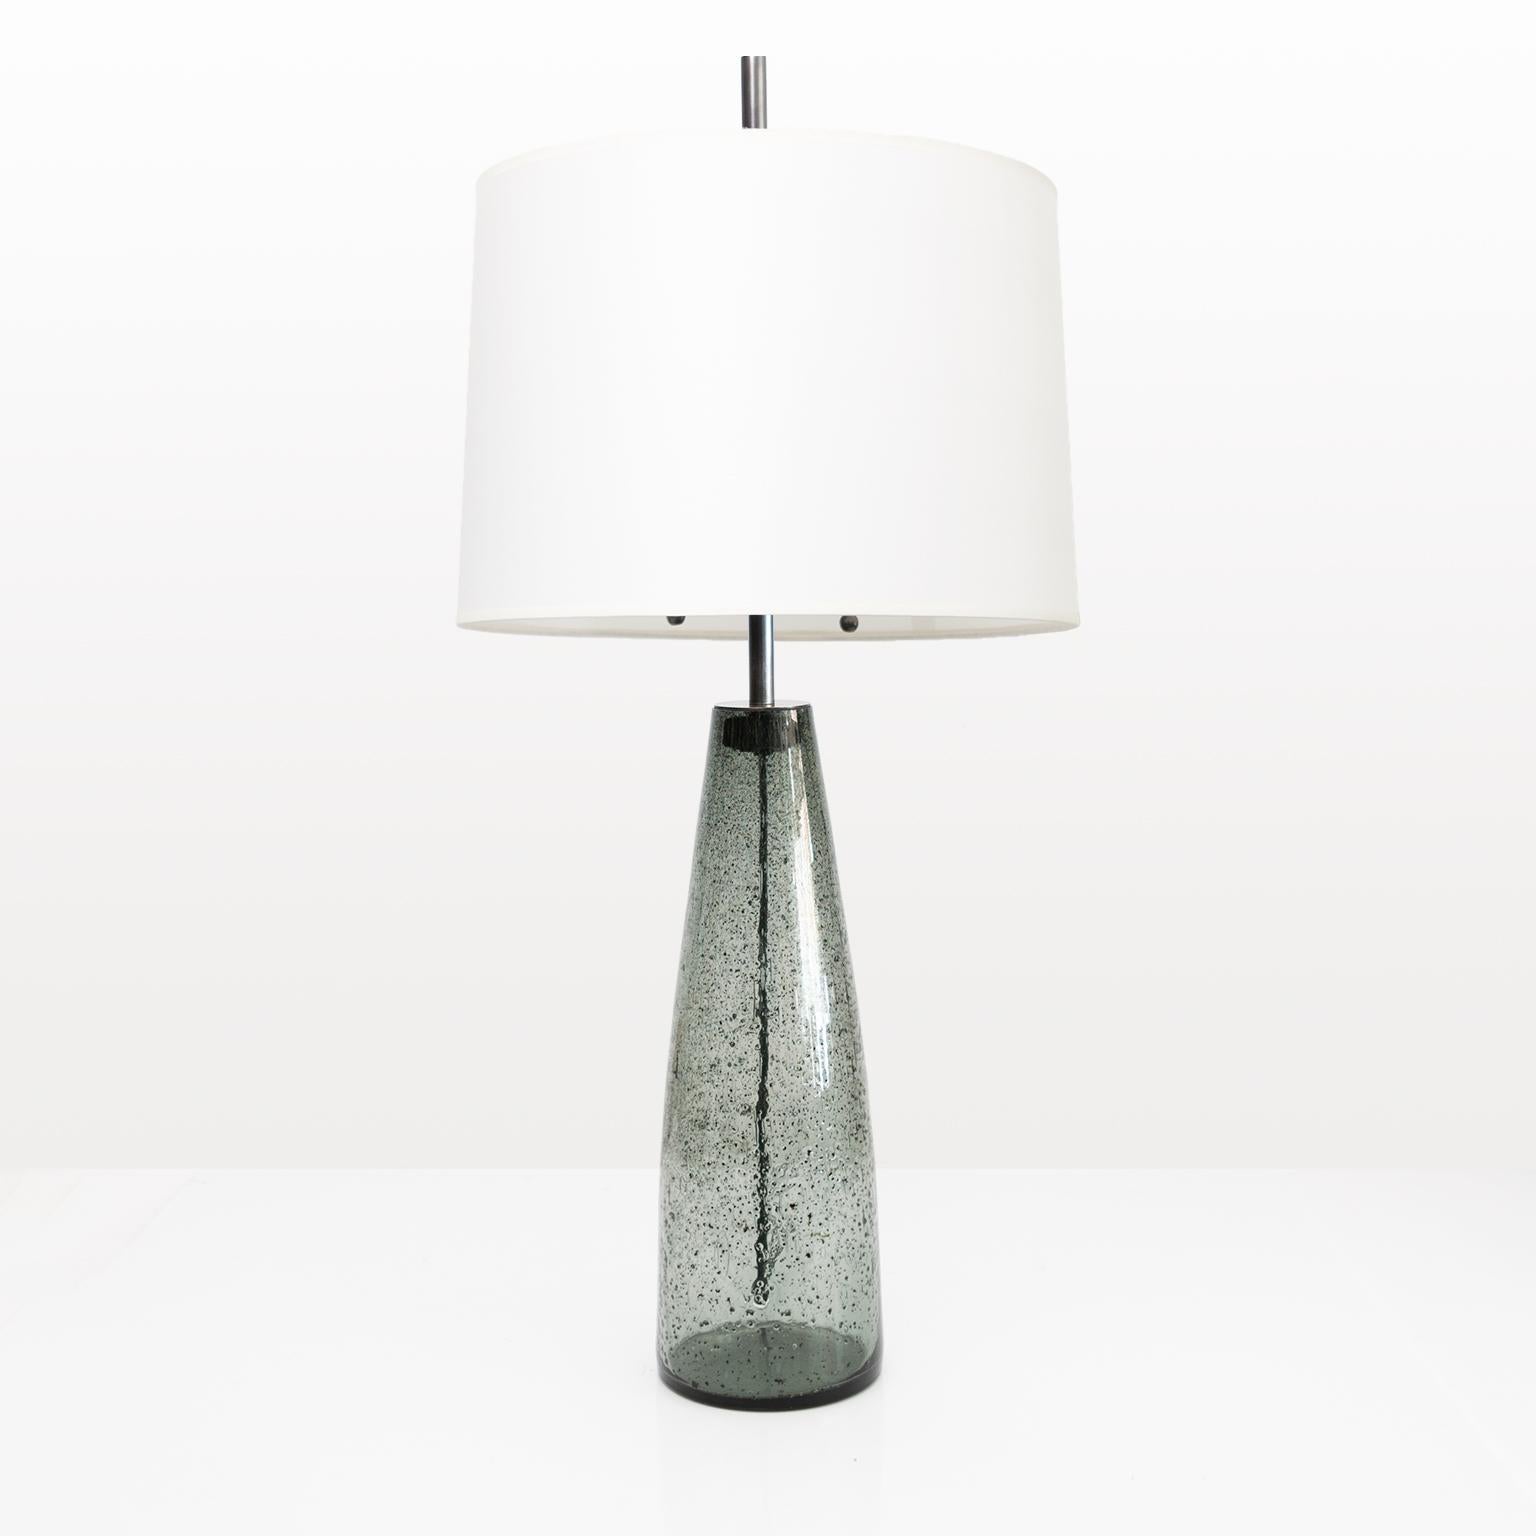 Scandinavian Modern Pair of Stromboli Lamps by Bengt Orup, Hyllinge Glasbruk In Excellent Condition For Sale In New York, NY